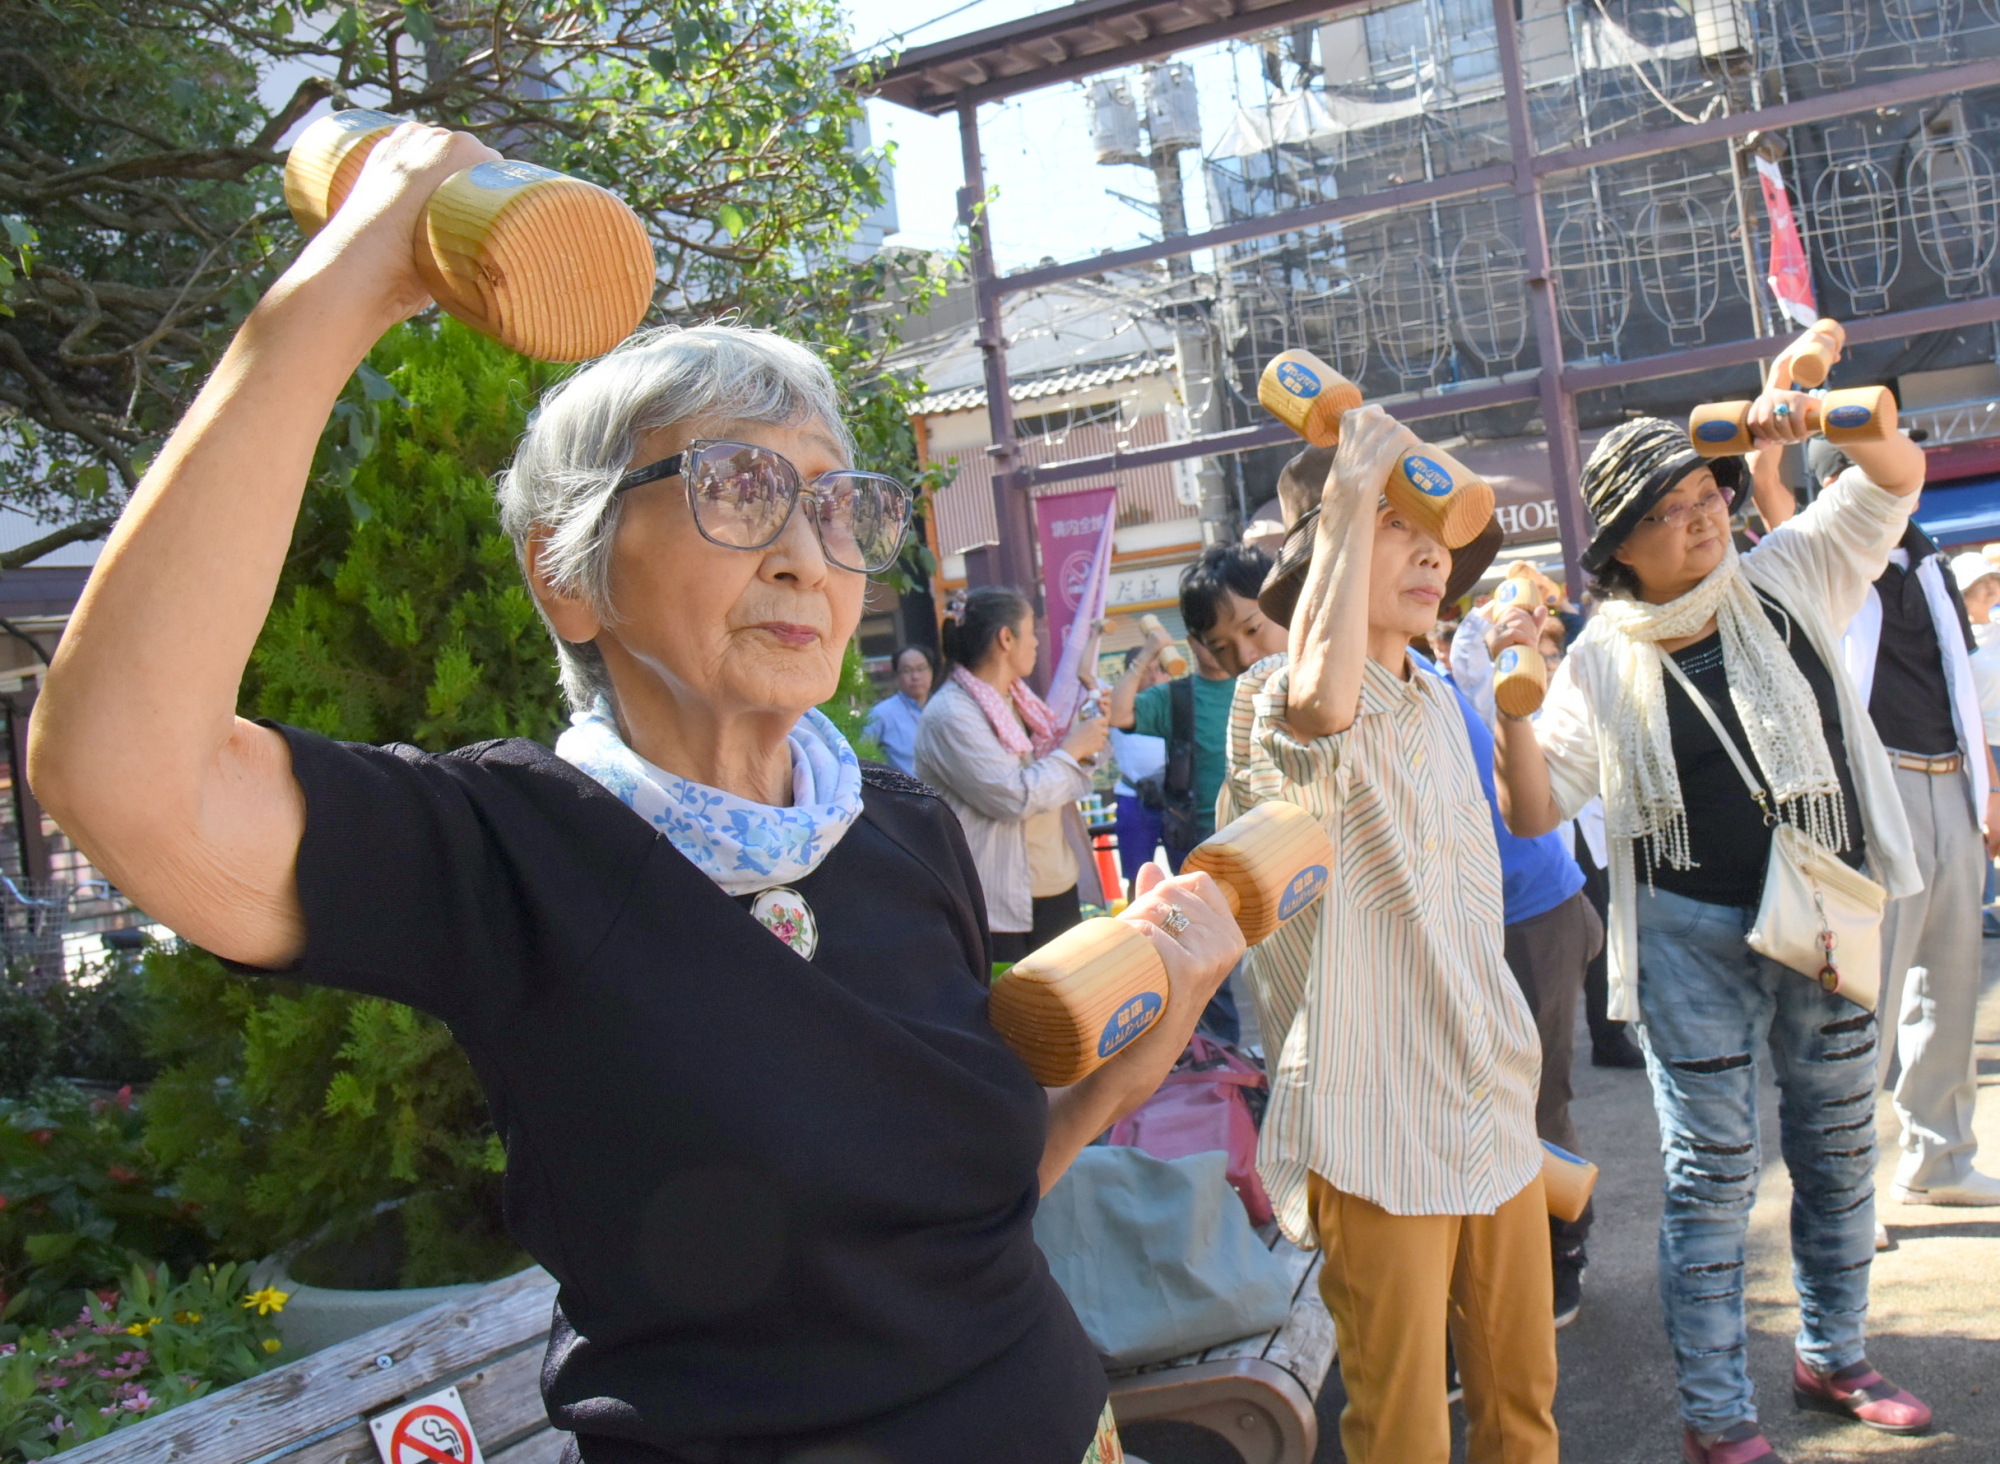 Seniors exercise Monday during a health promotion event for Respect for the Aged Day at Koganji Temple in Tokyo's Sugamo neighborhood. The street near the temple is known as a popular shopping area for seniors. | SATOKO KAWASAKI